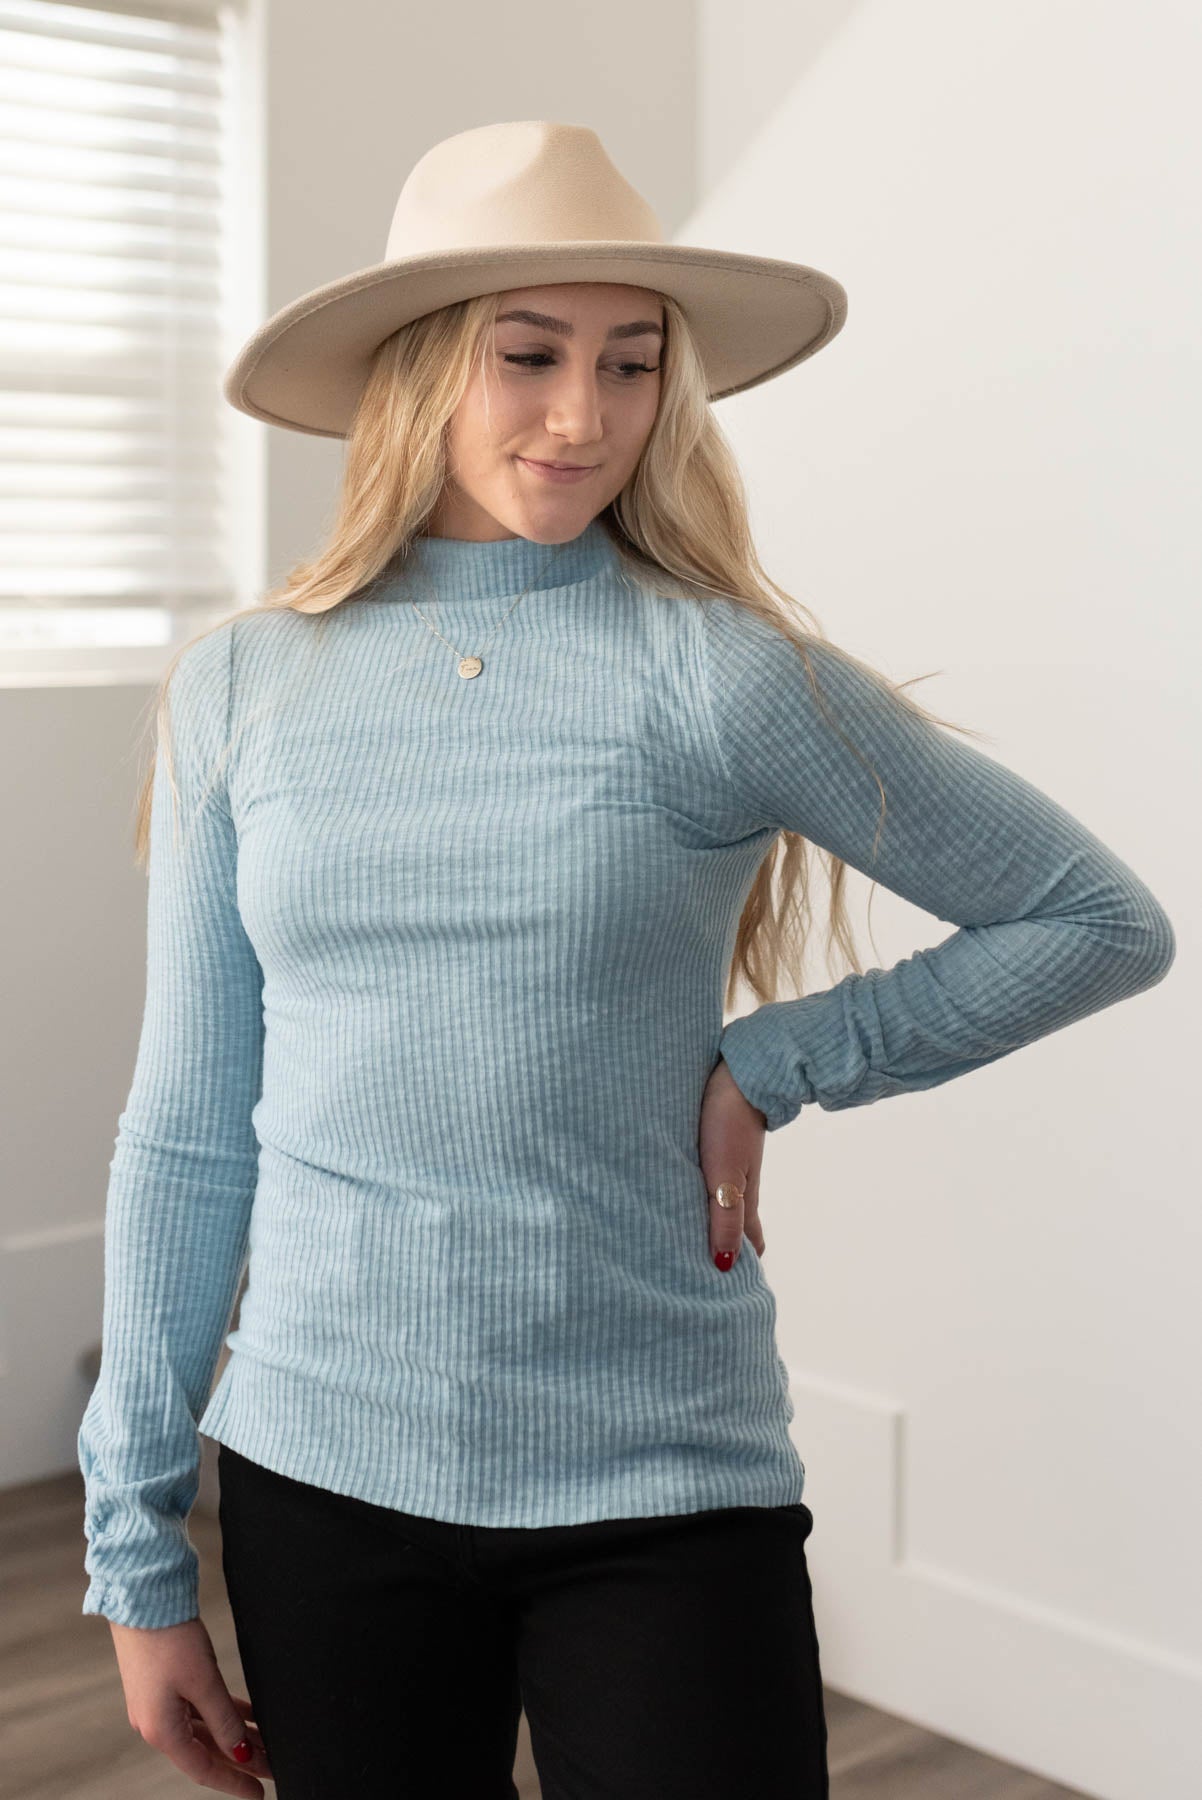 Sky blue top with mock turtle neck and long sleeves